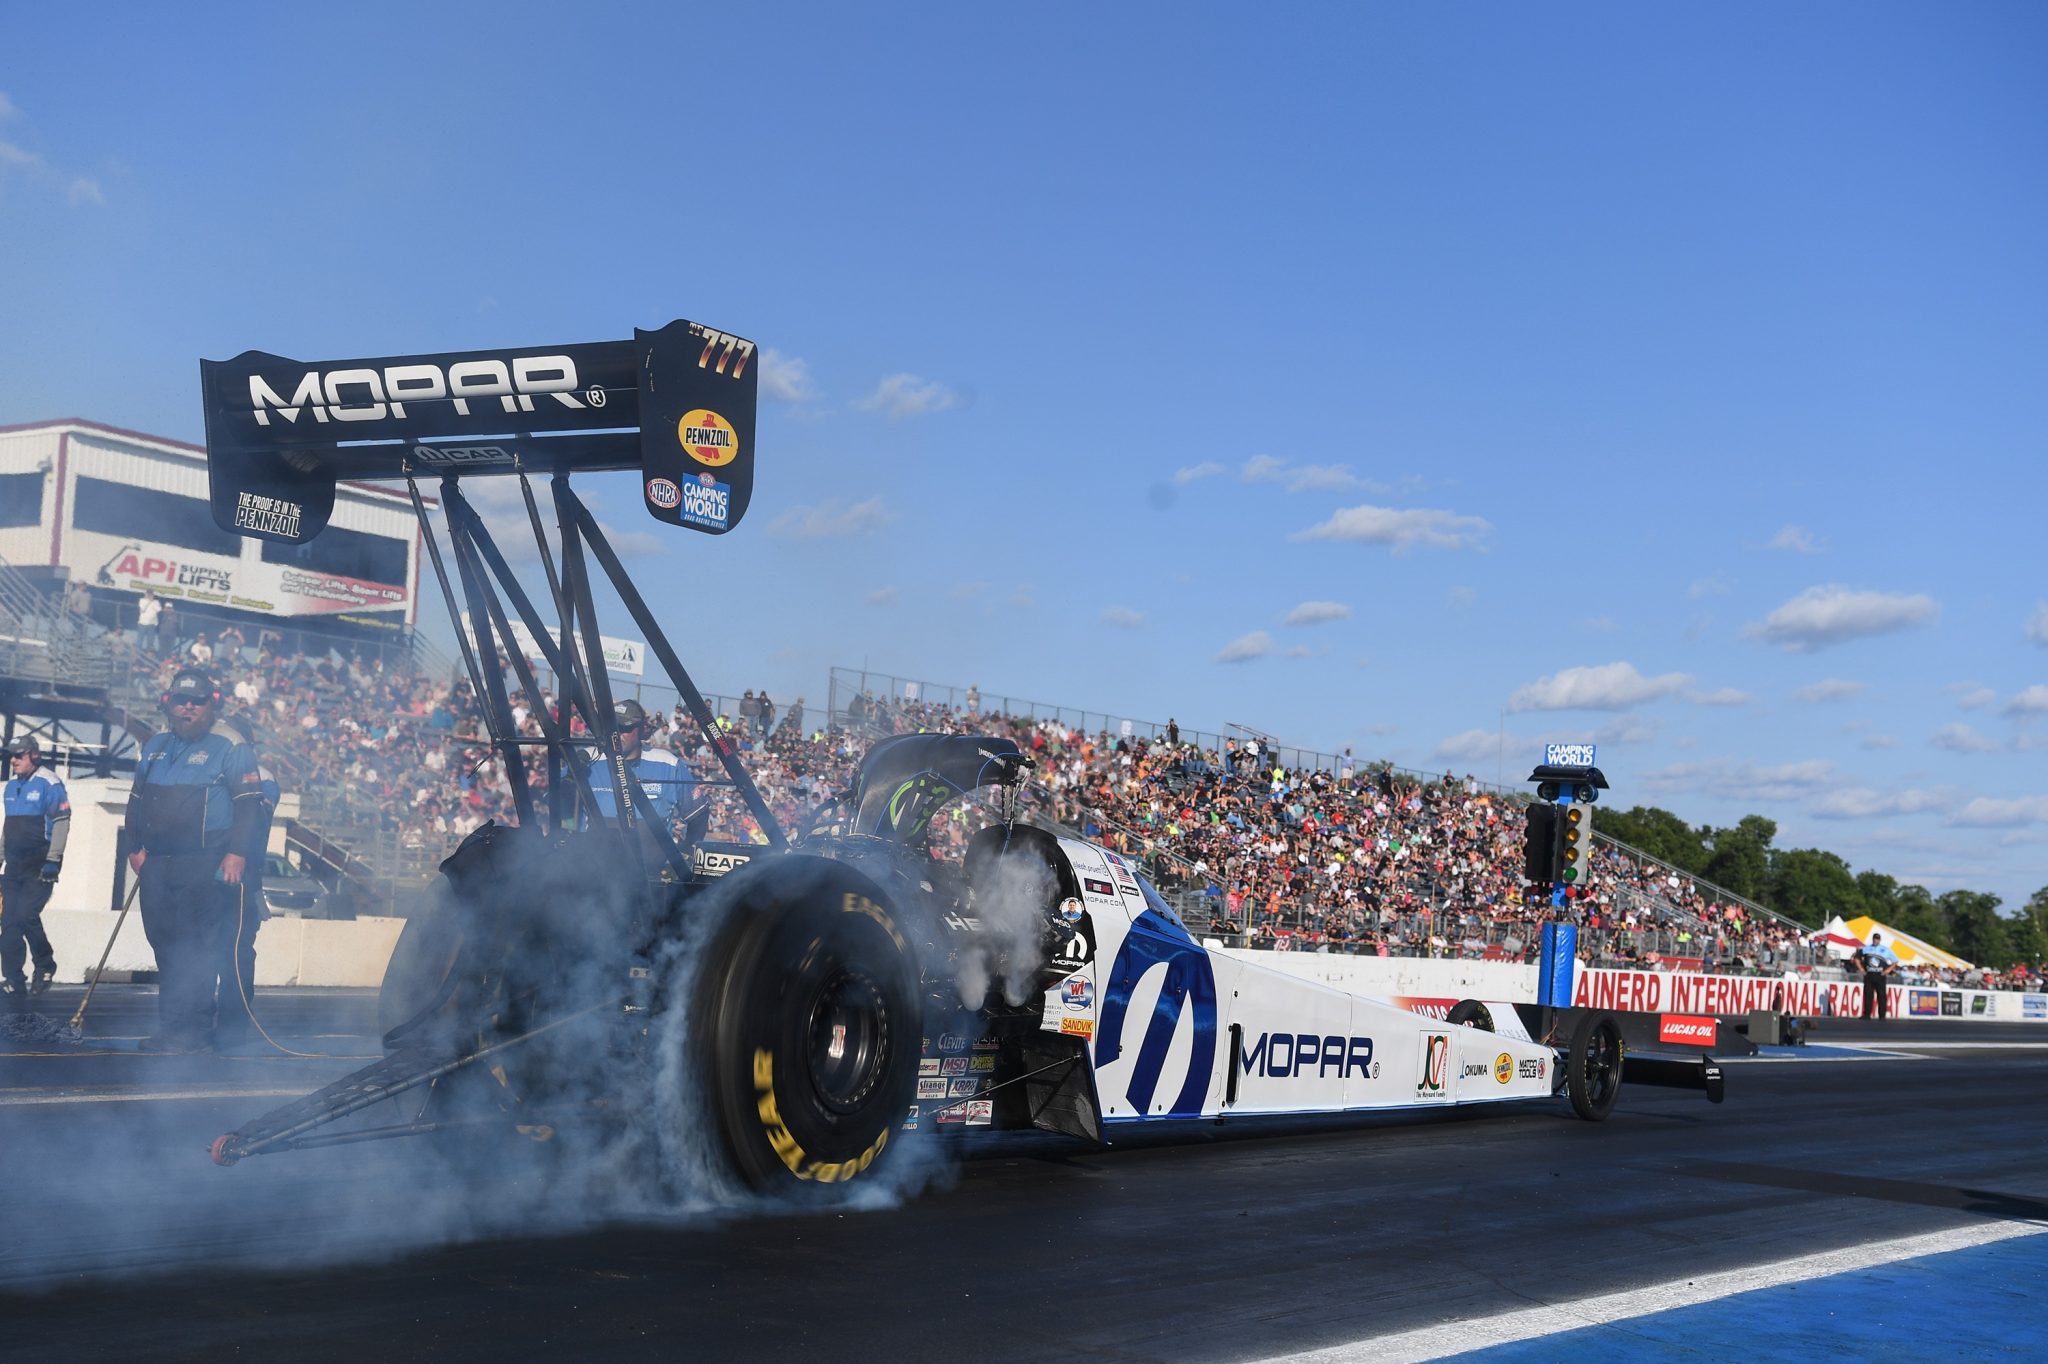 NHRA WrapUp Racing Returns to Brainerd for the Lucas Oil Nationals